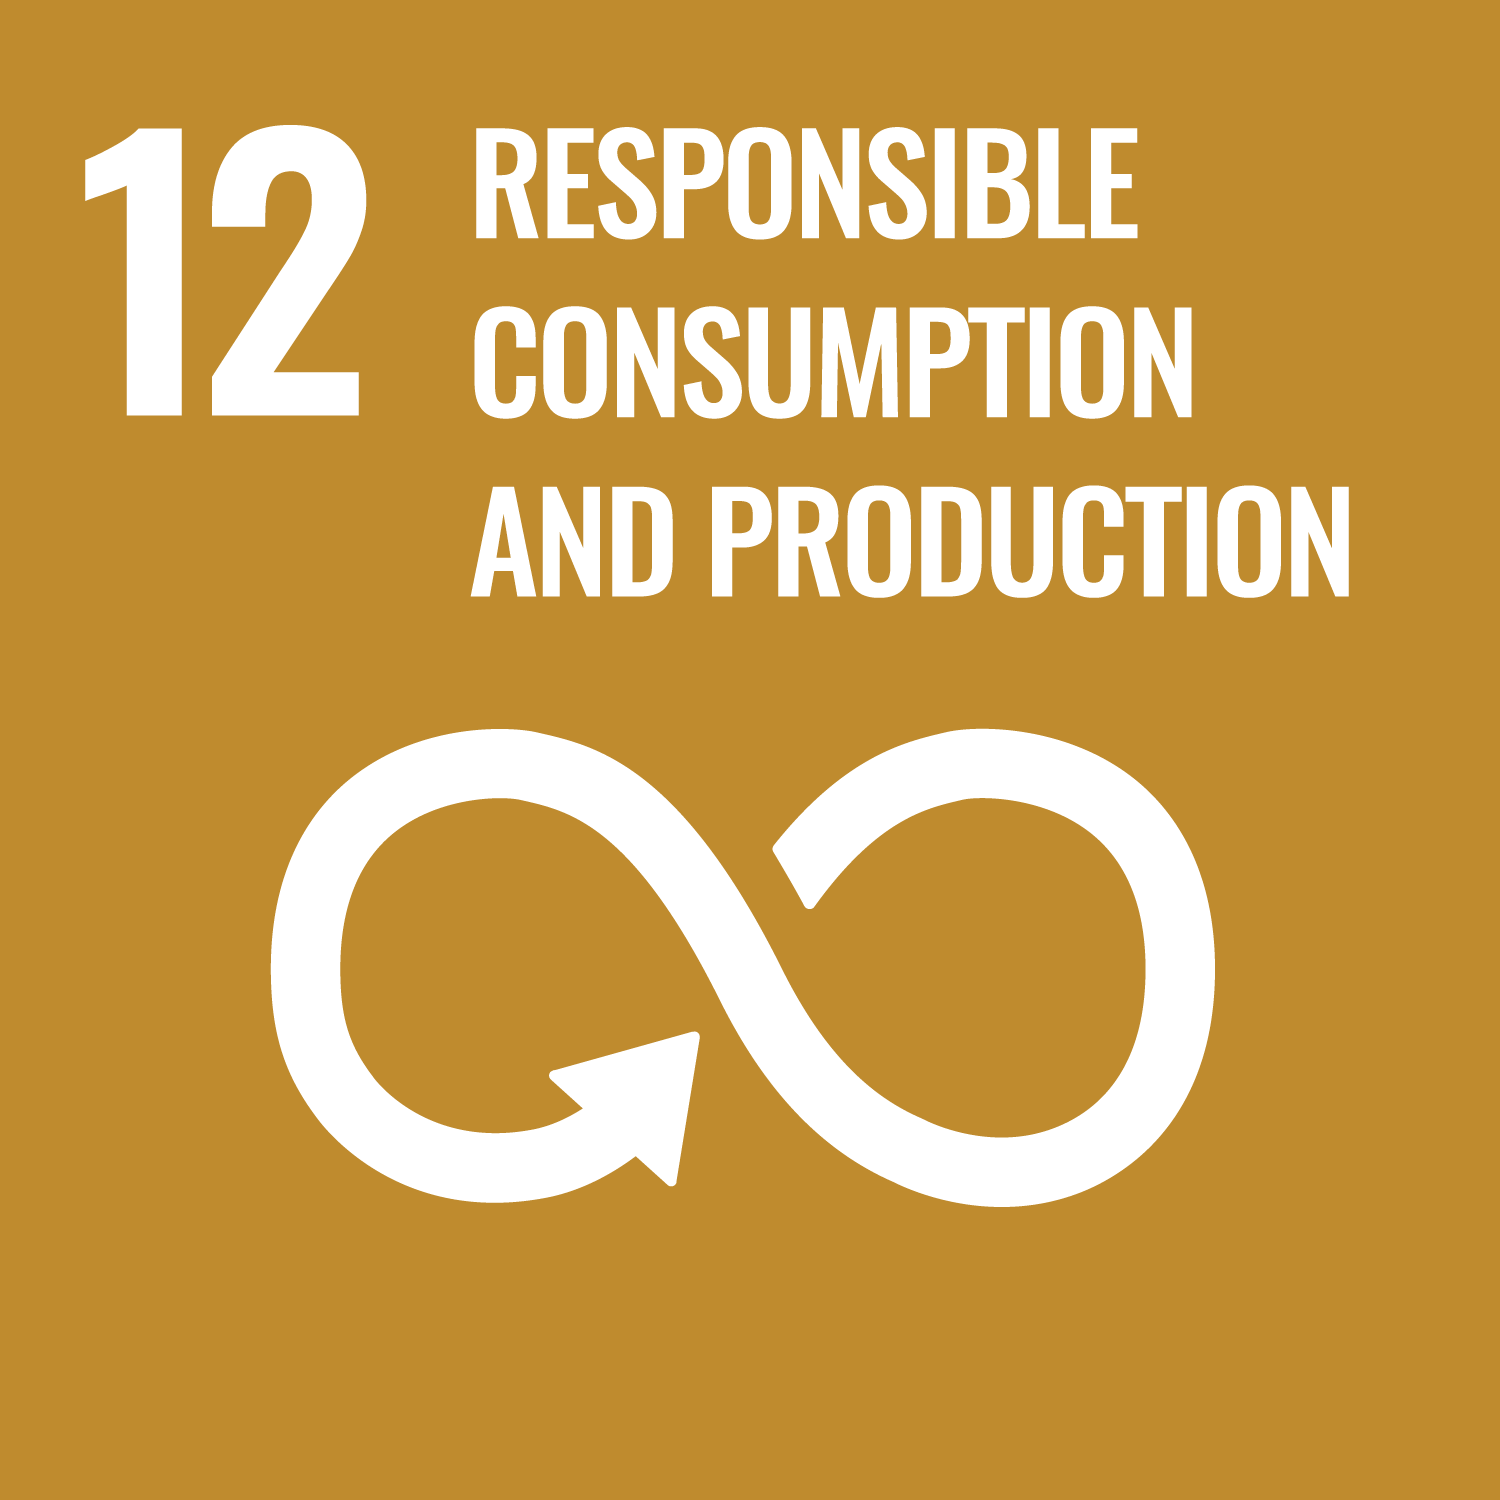 Responsible Consumption and Production SDG Graphic